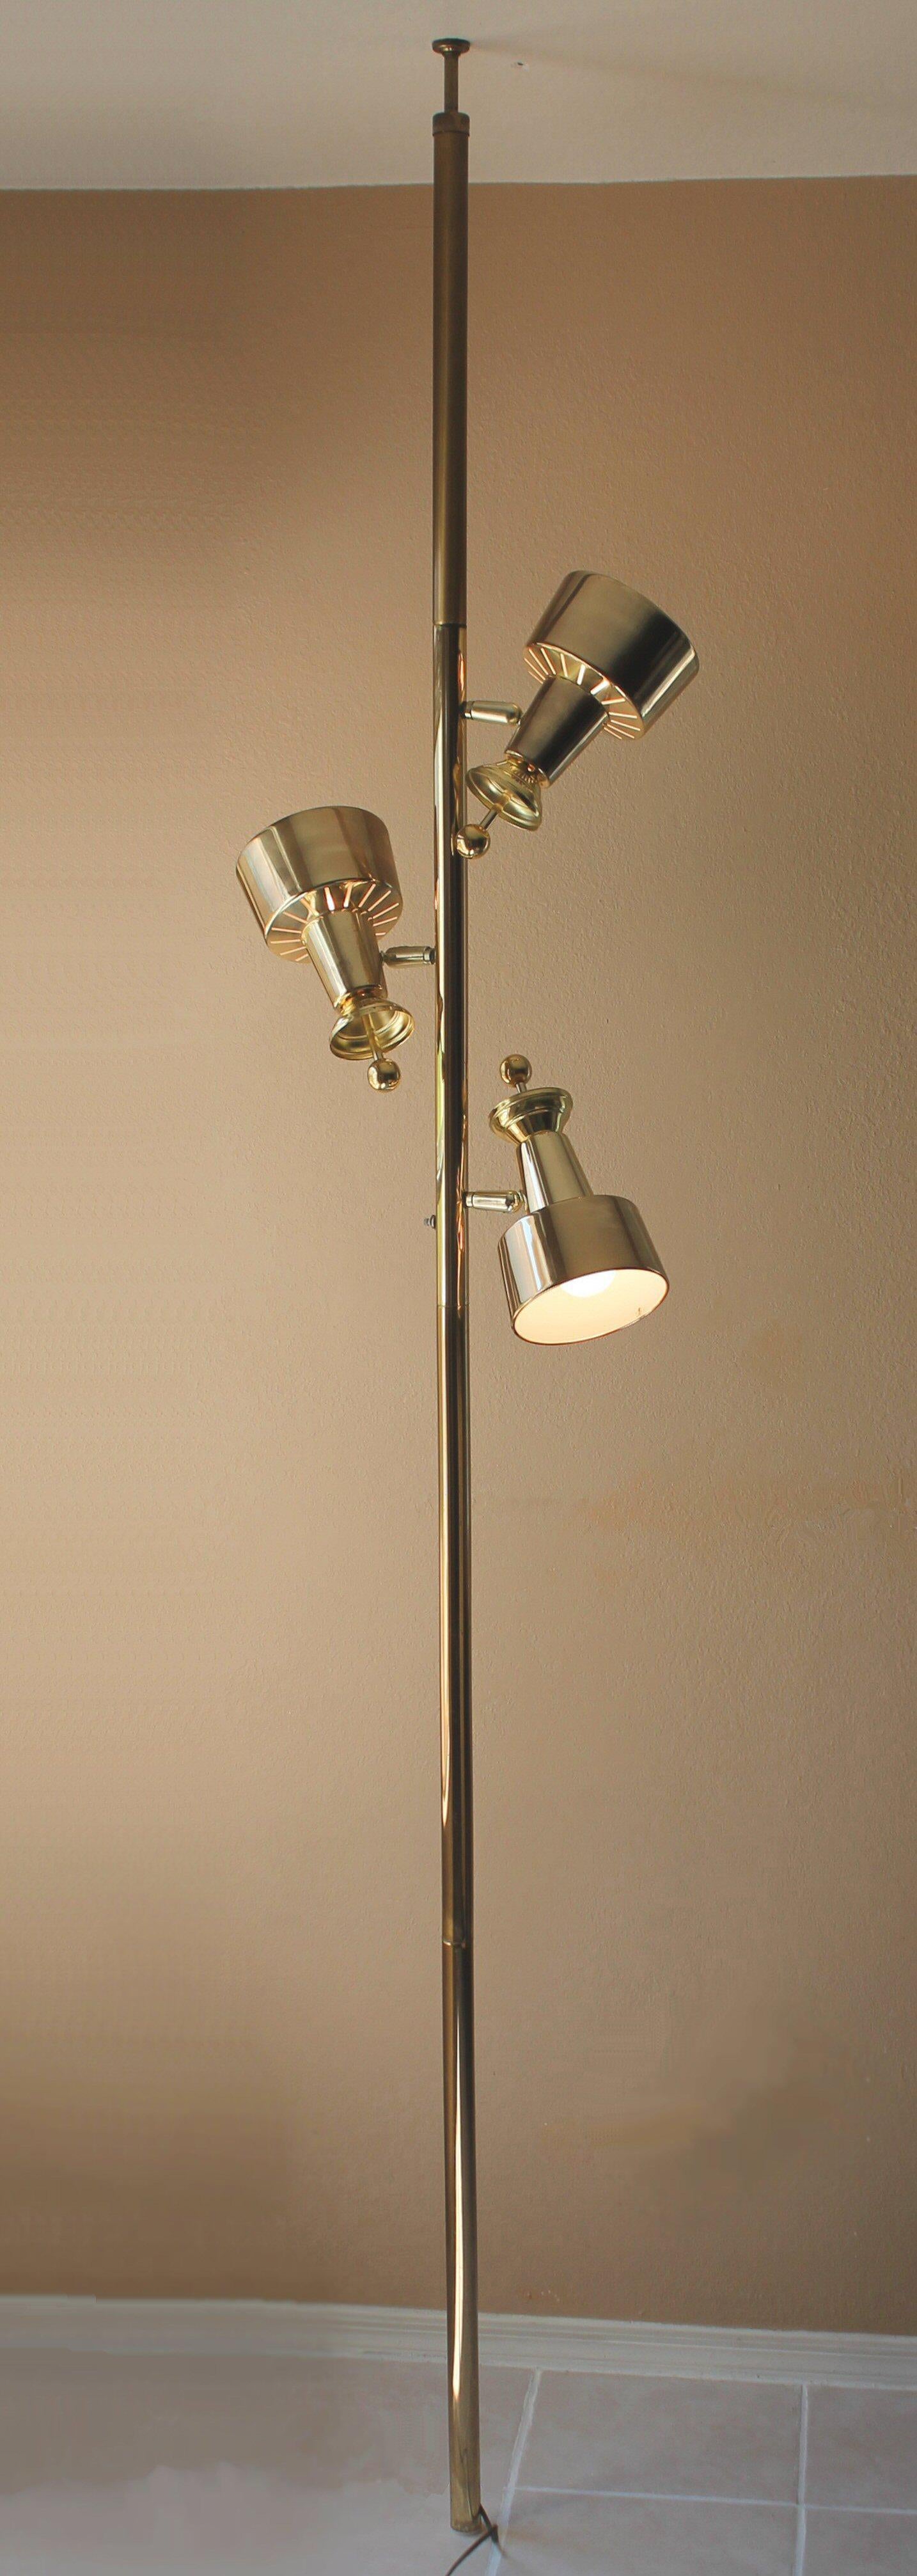 ICONIC!


SPACE AGE
MID CENTURY MODERN
GLEAMING BRASS
TENSION POLE LAMP!


Incredible Quality!

In the manner of Stiffel designs.


CIRCA 1959-60

( FITS 8 - 8.5 FT. CEILING )

Welcome to the Future!  

This is perhaps the most sensational Jetsons